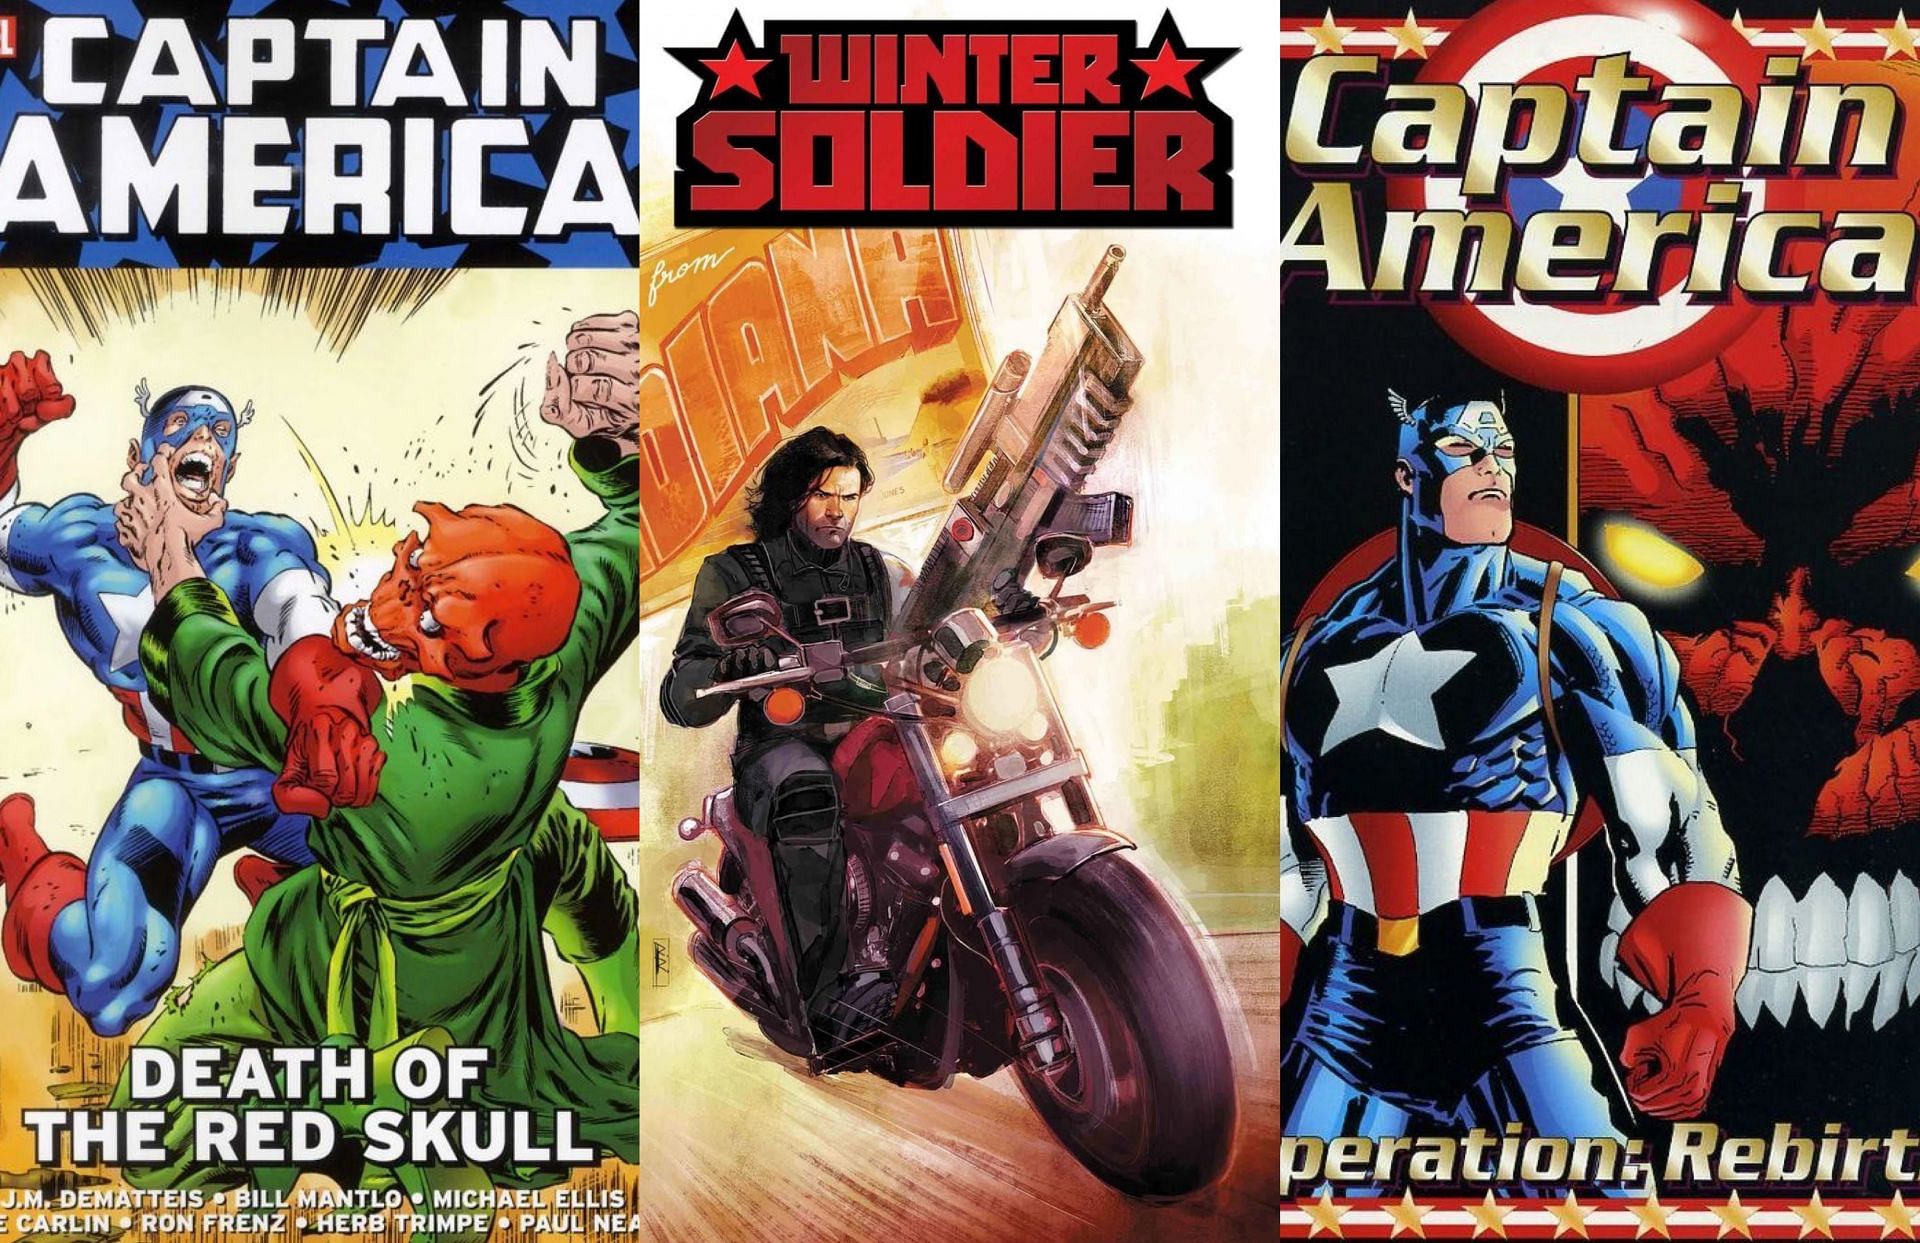 The Death of the Red Skull/Winter Soldier/Operation Rebirth comics (Images via Marvel Comics)